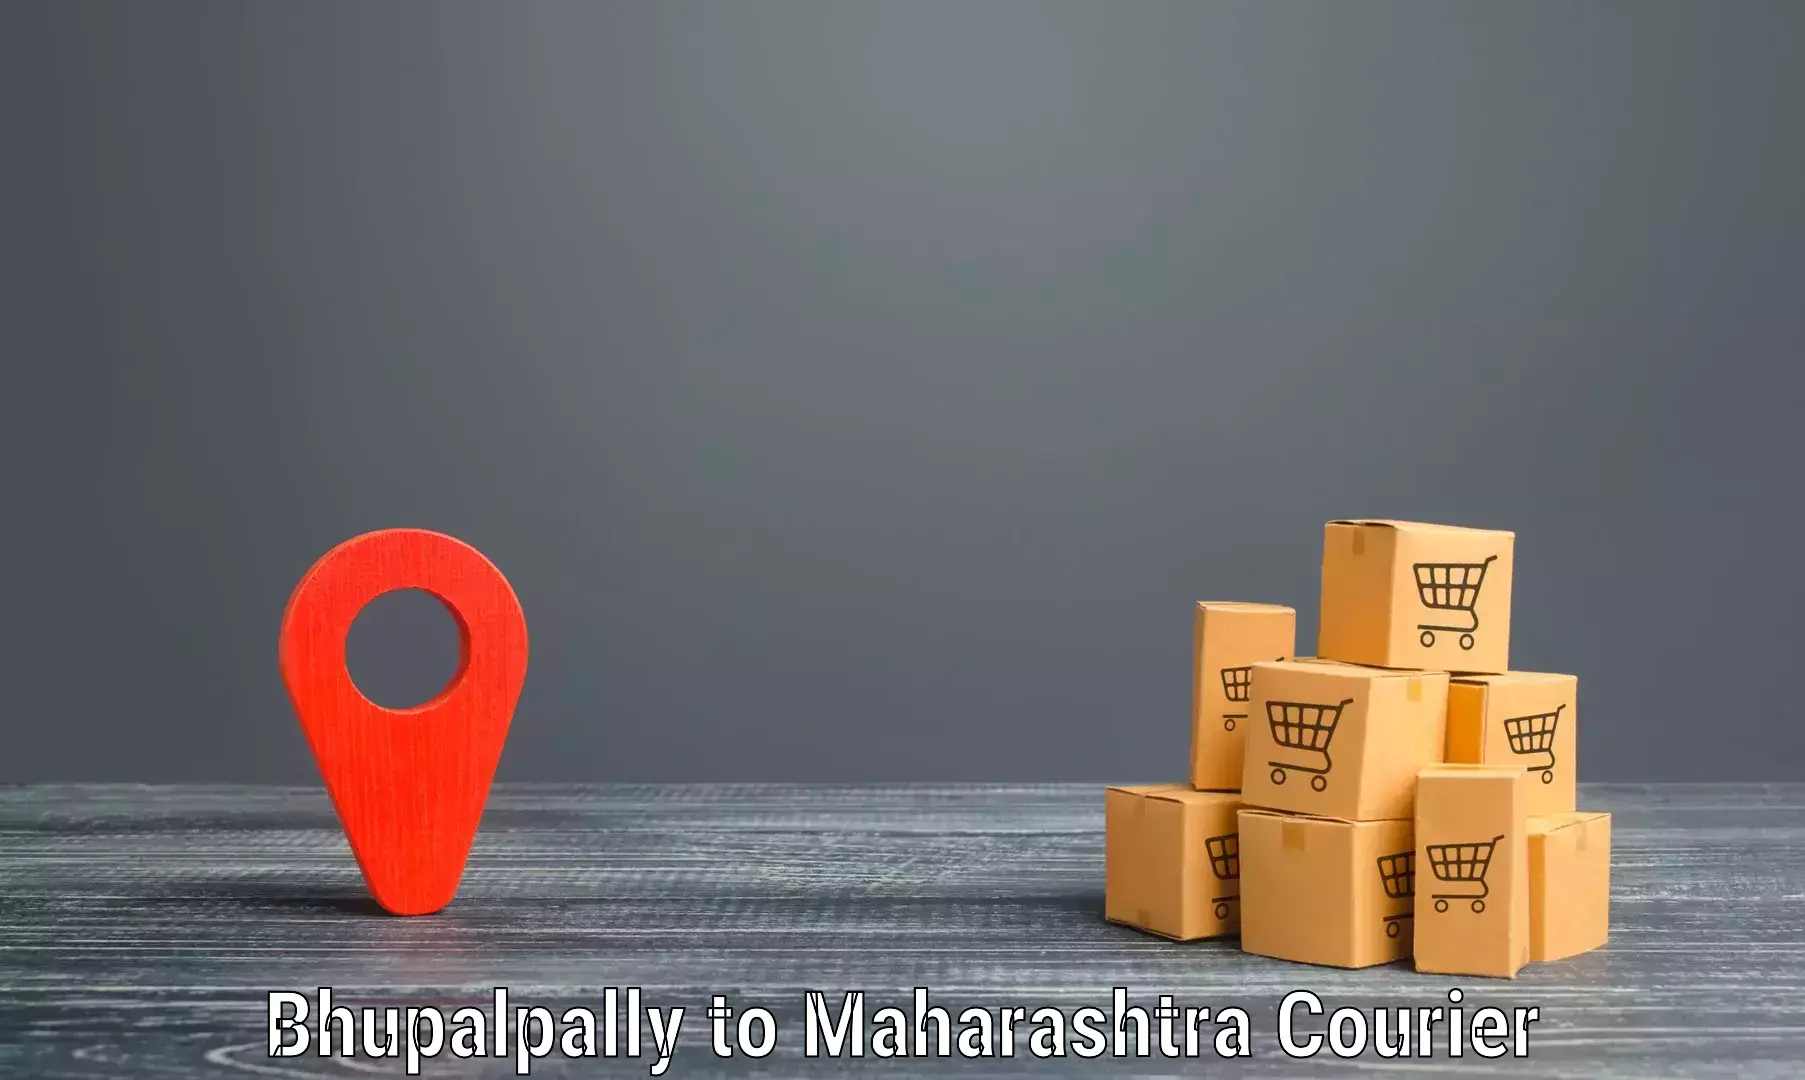 Comprehensive delivery network Bhupalpally to Kopargaon